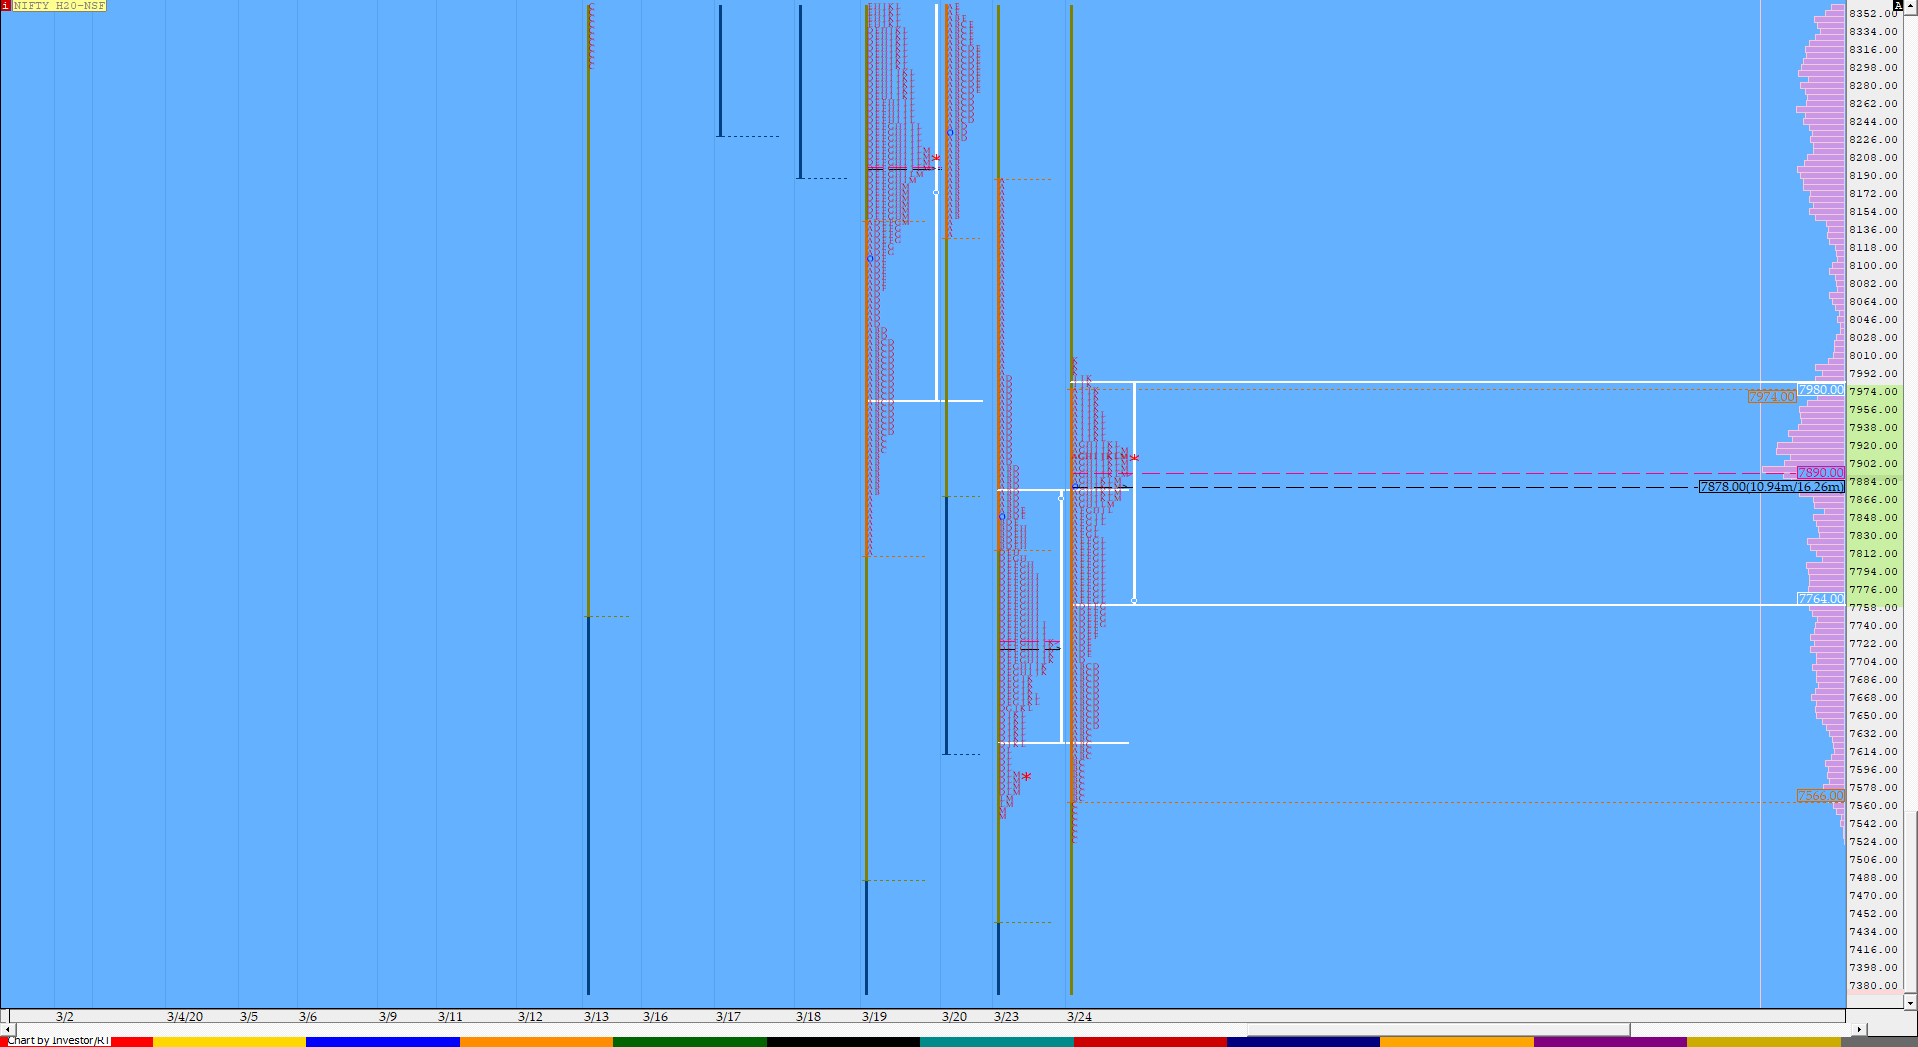 Nf Compo1 17 Market Profile Analysis Dated 24Th Mar 2020 Banknifty Futures, Charts, Day Trading, Intraday Trading, Intraday Trading Strategies, Market Profile, Market Profile Trading Strategies, Nifty Futures, Order Flow Analysis, Support And Resistance, Technical Analysis, Trading Strategies, Volume Profile Trading